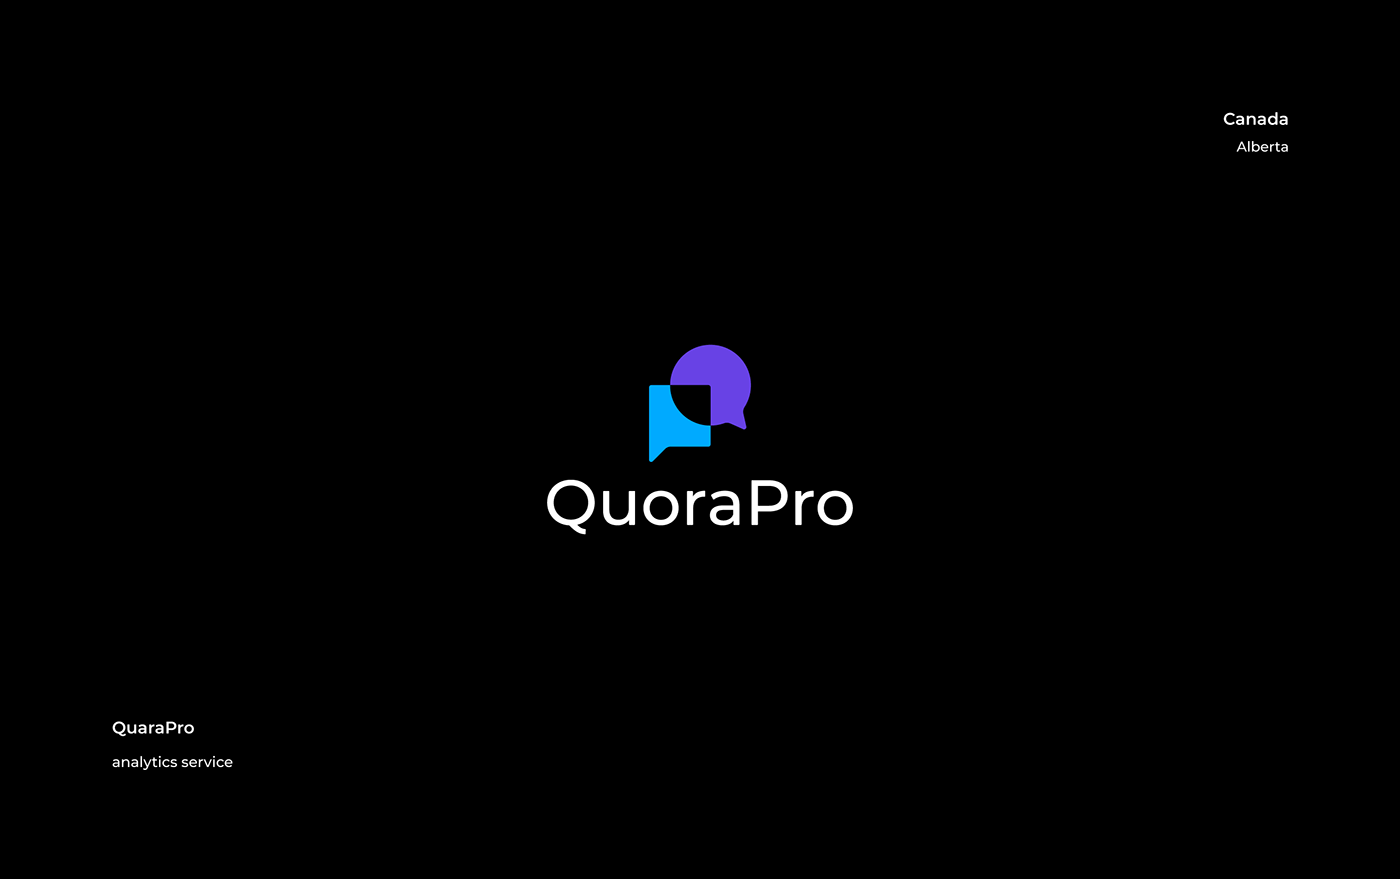 QuoraPro
SaaS project that will automate the marketing of companies on the Quora site
Helps clients 